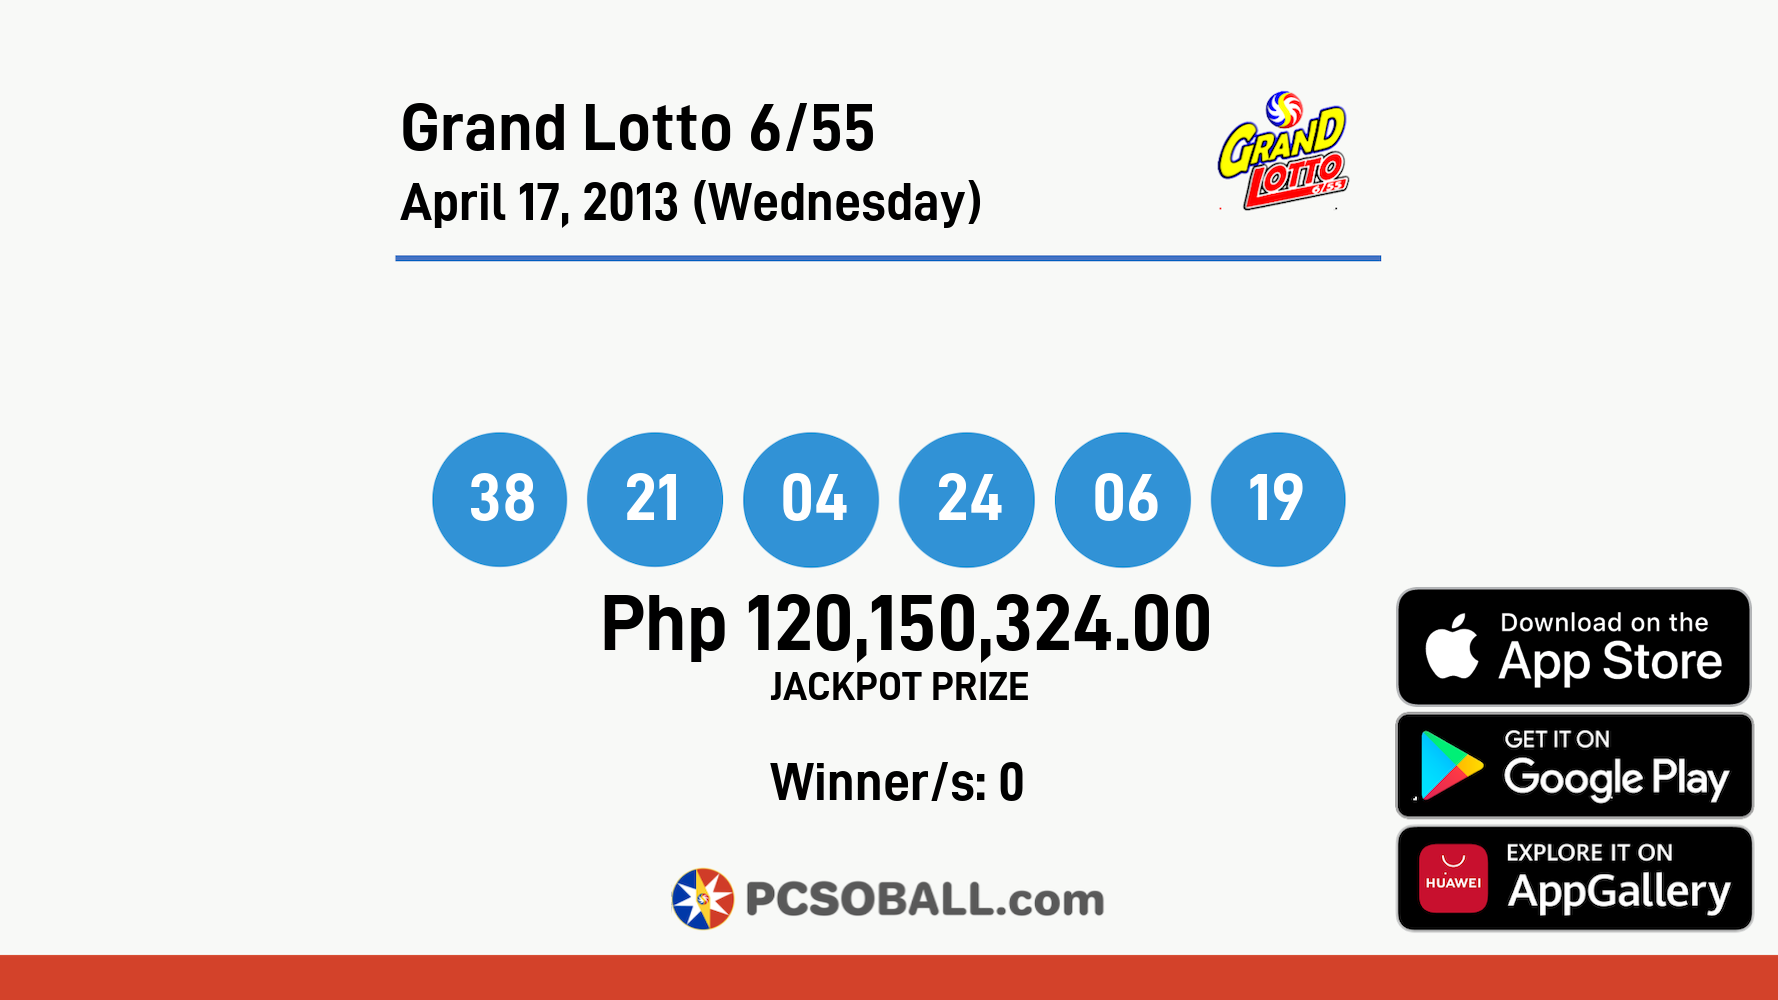 Grand Lotto 6/55 April 17, 2013 (Wednesday) Result